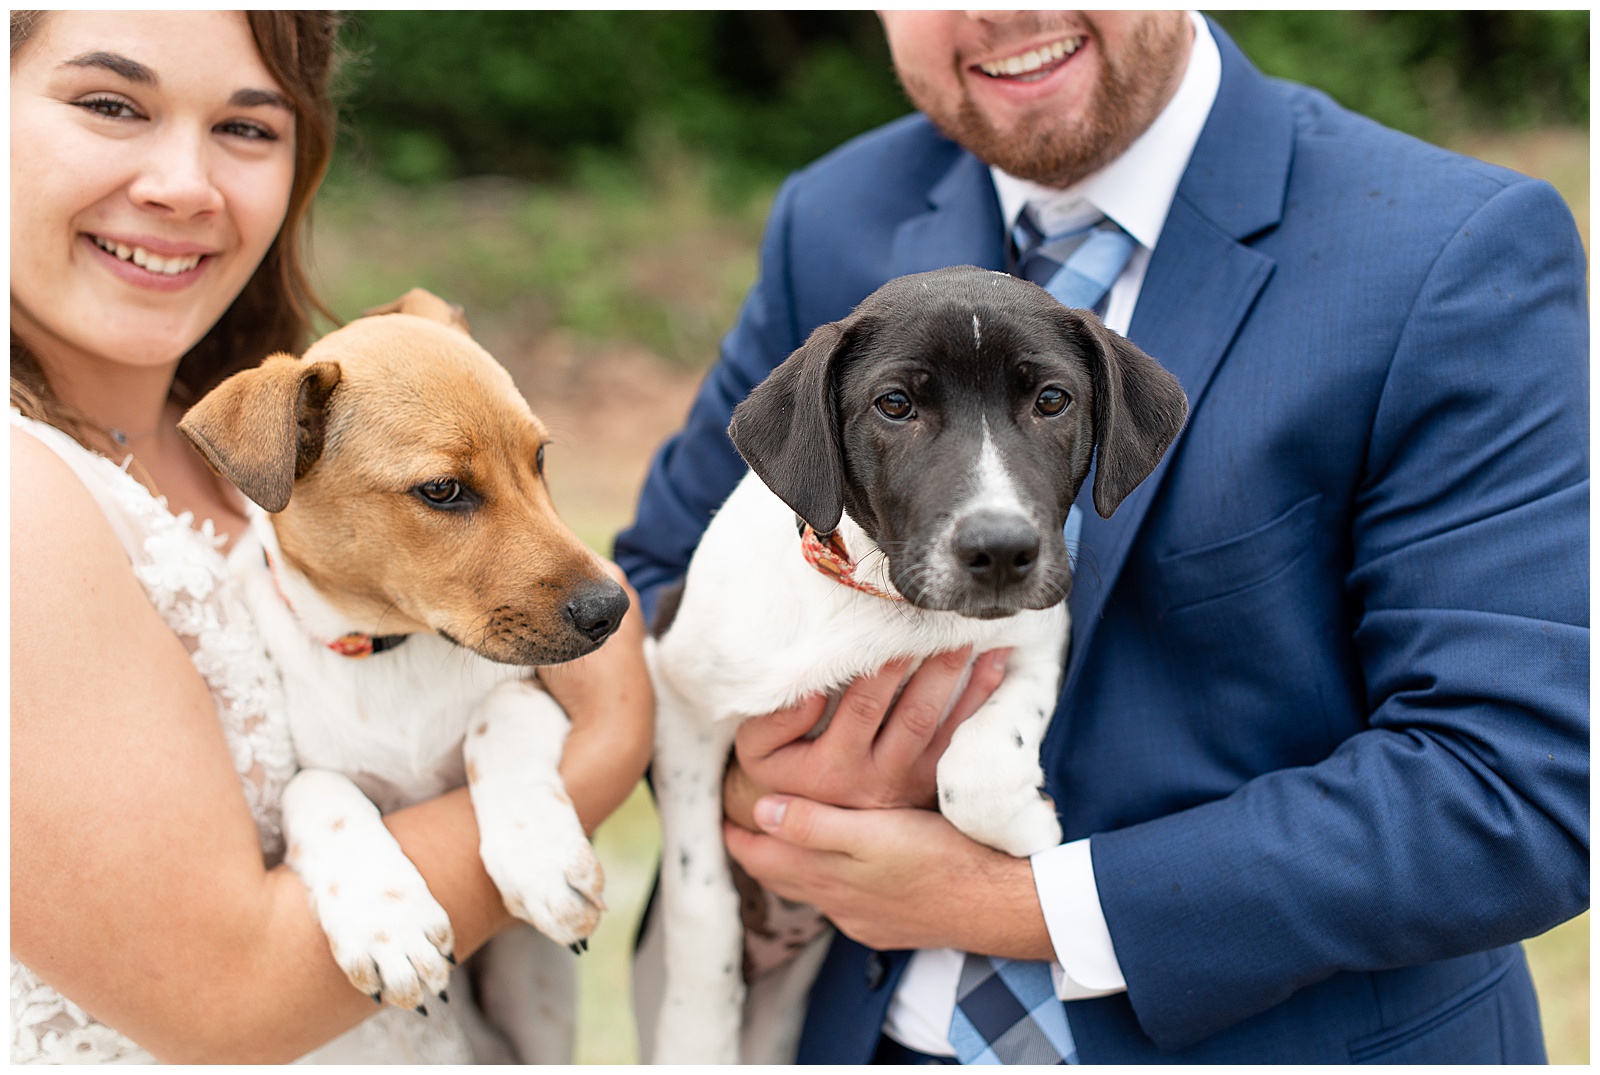 bride and groom holding two puppies at wedding ceremony